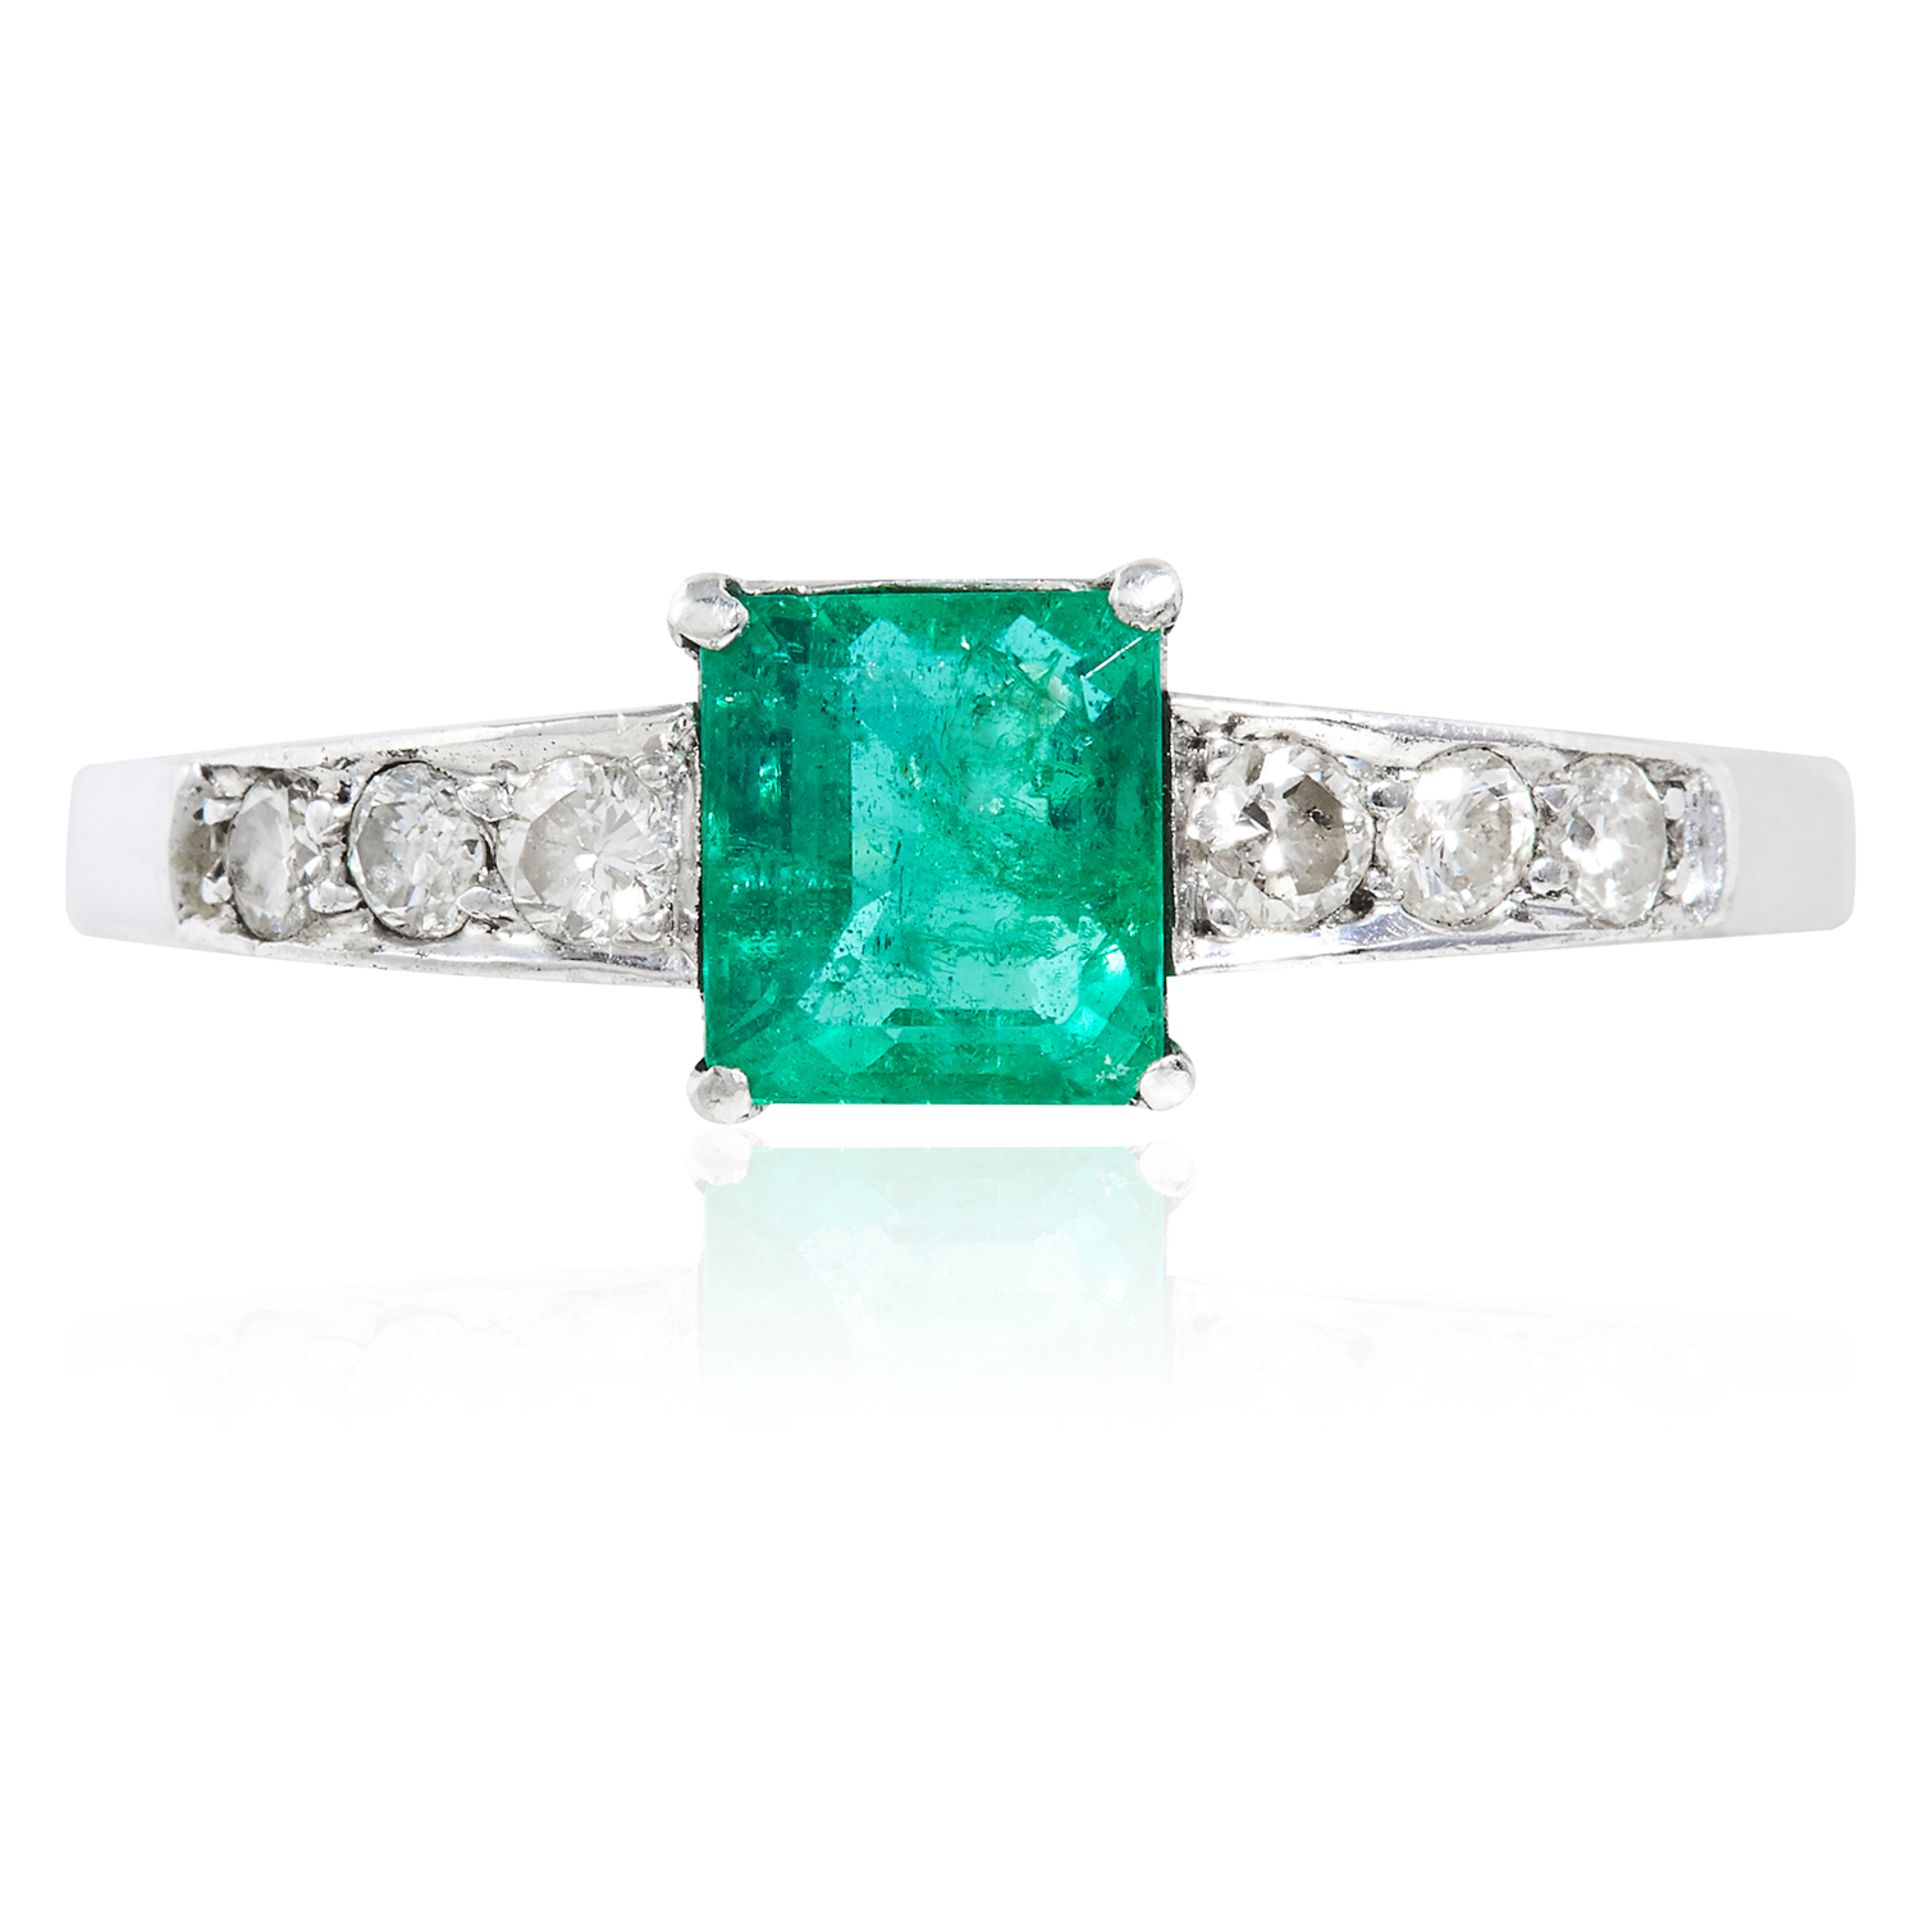 AN EMERALD AND DIAMOND RING in platinum or white gold, the central step cut emerald of 0.85 carats